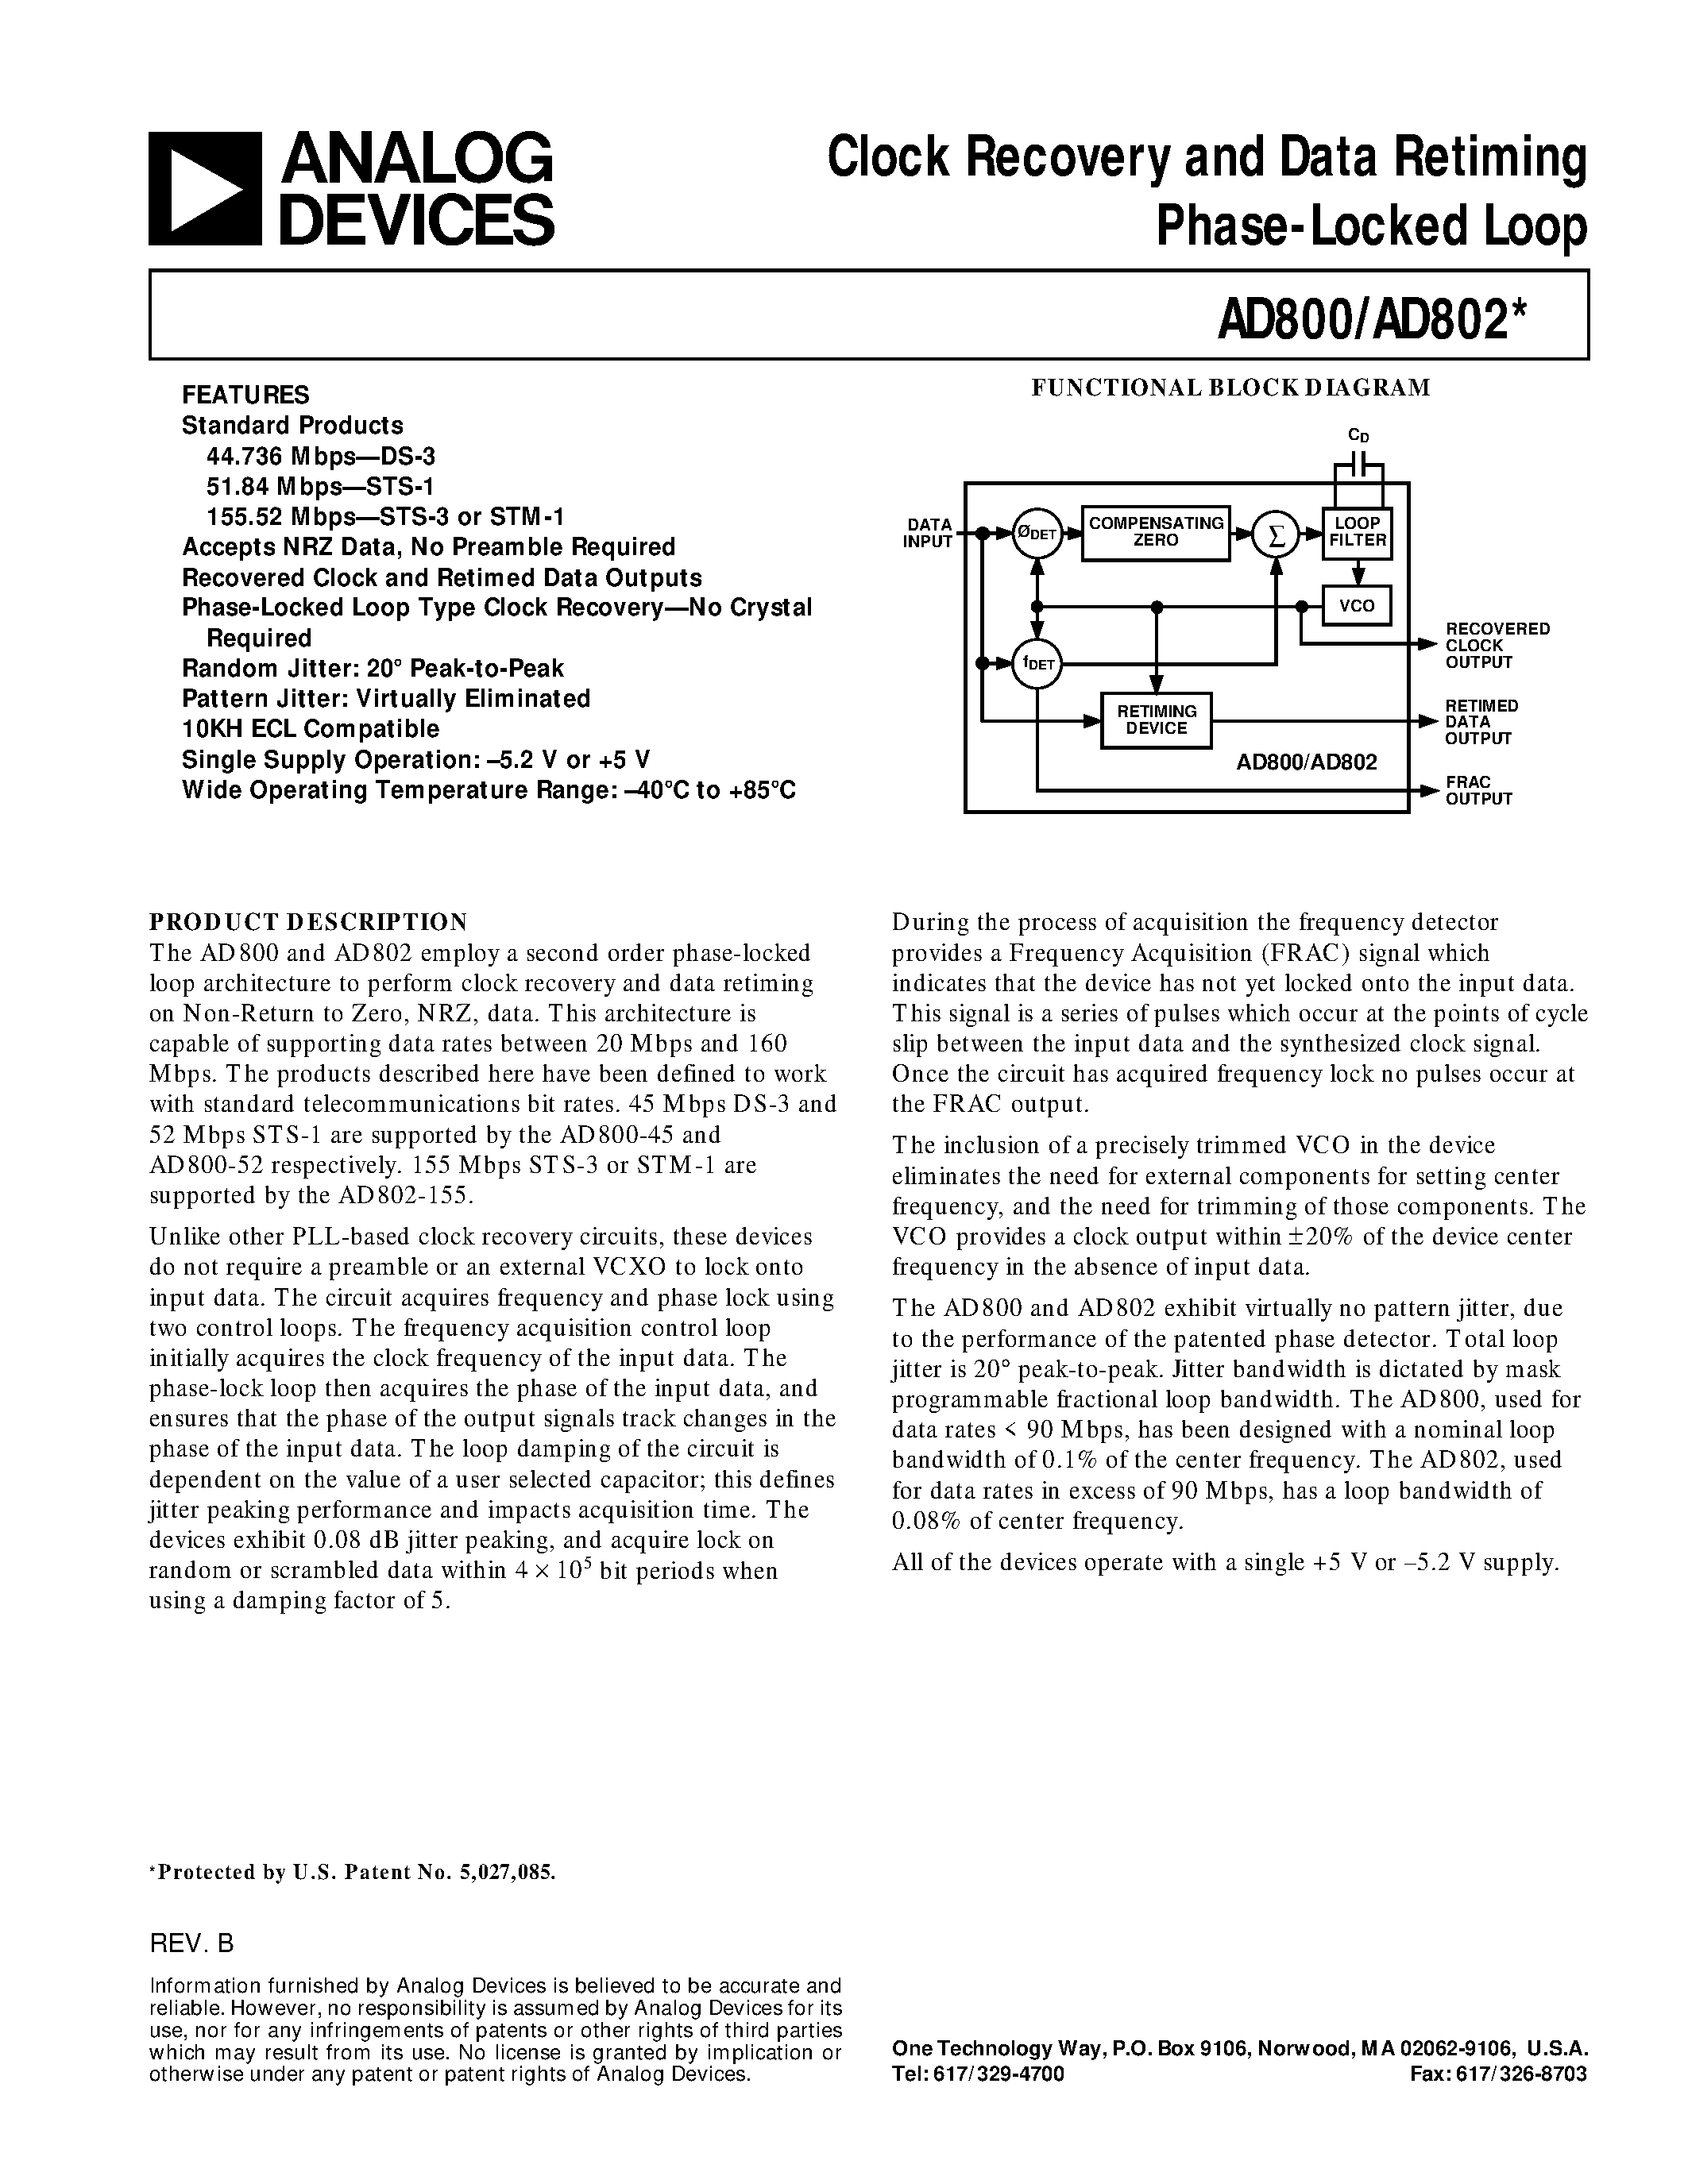 Datasheet AD800 - Clock Recovery and Data Retiming Phase-Locked Loop page 1